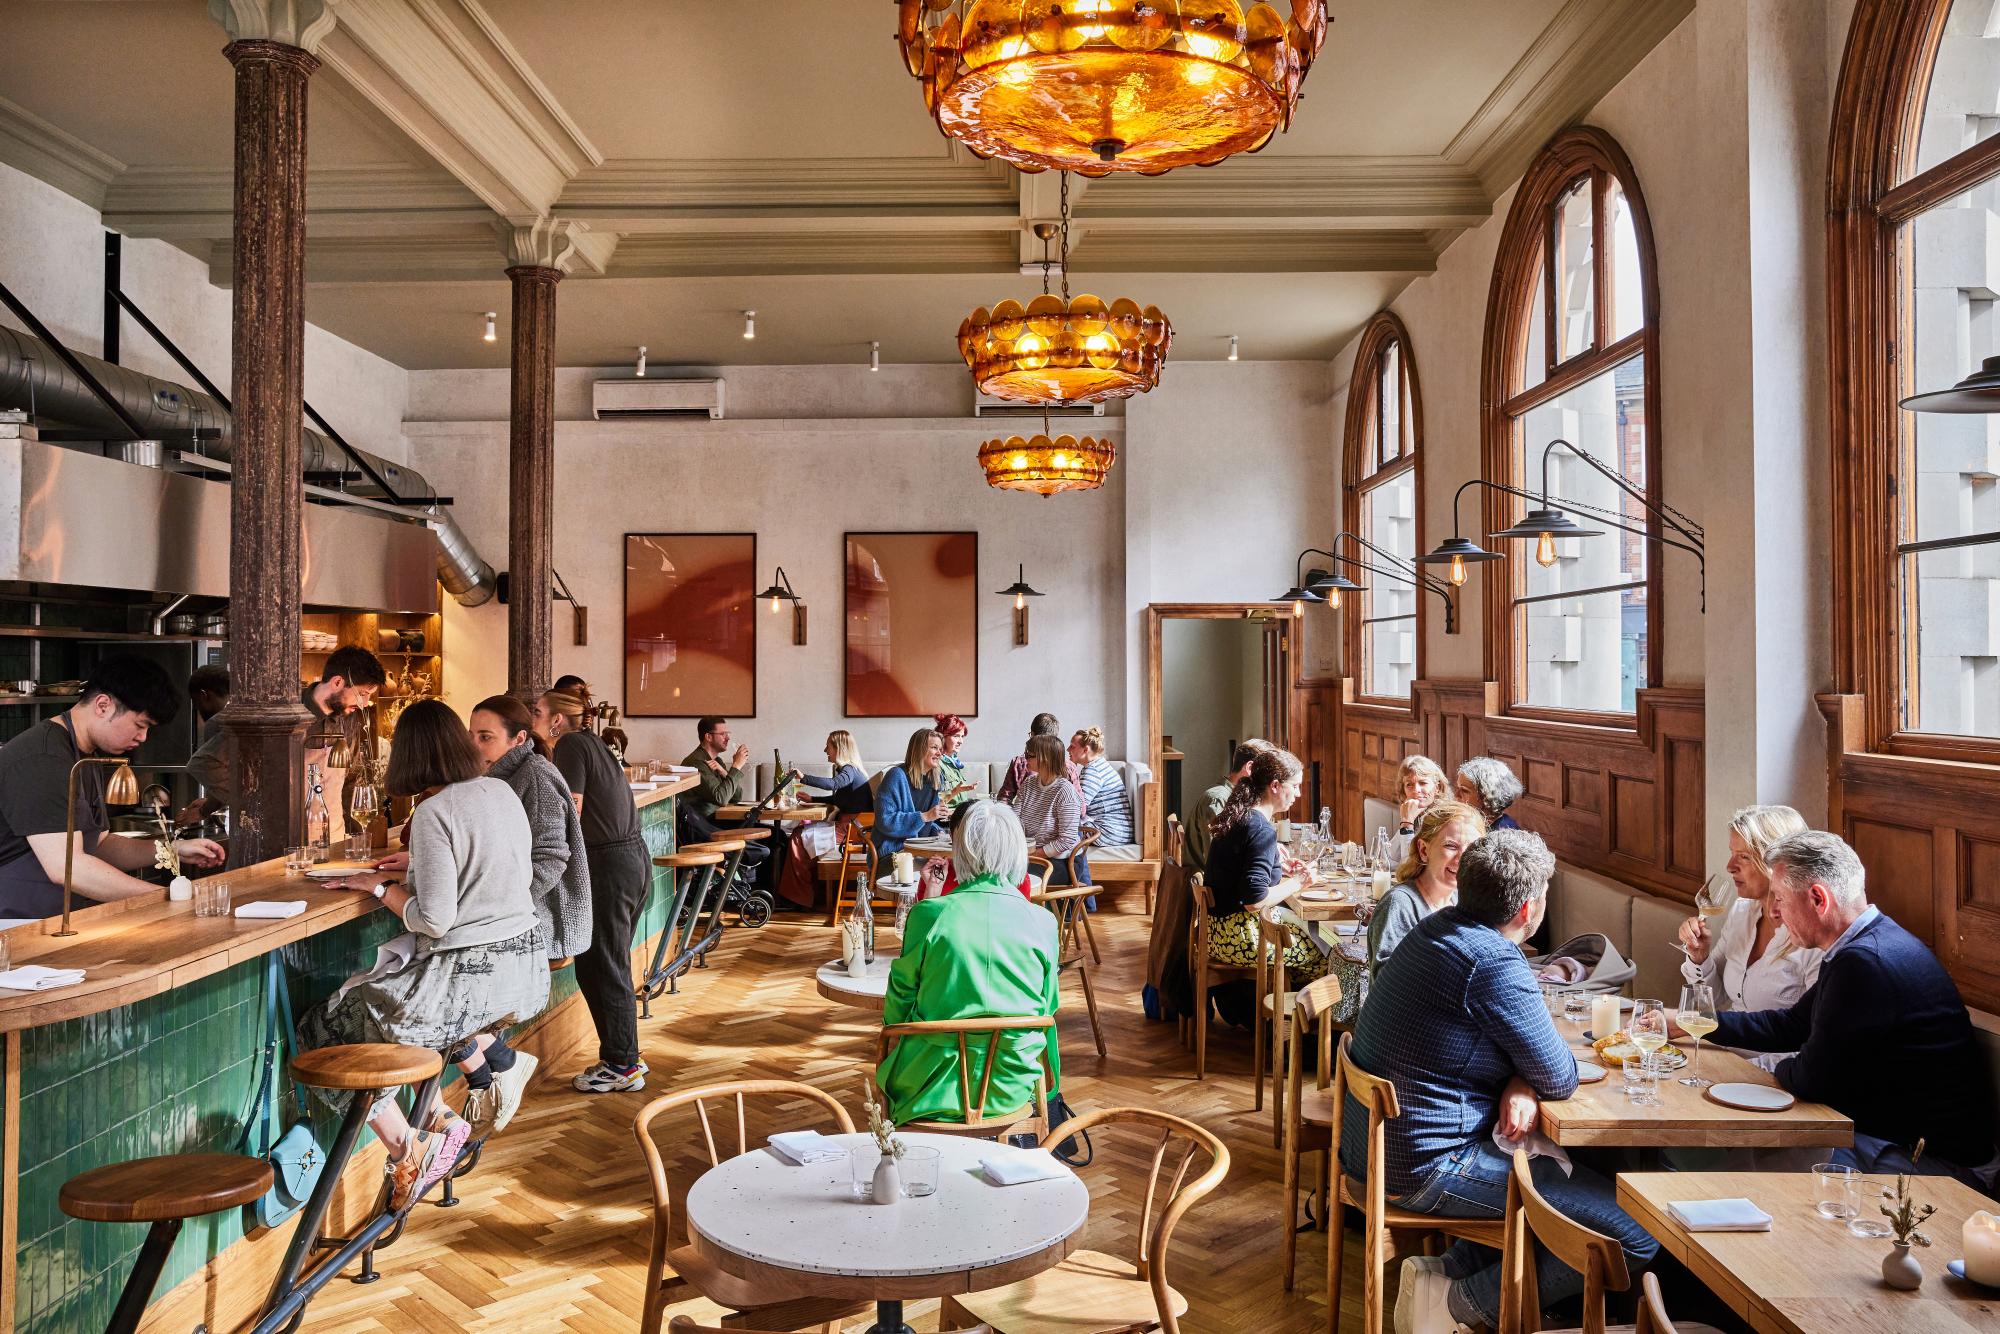 morchella, london ec1: ‘decadent, surprising, weird and usually triumphant’ – restaurant review